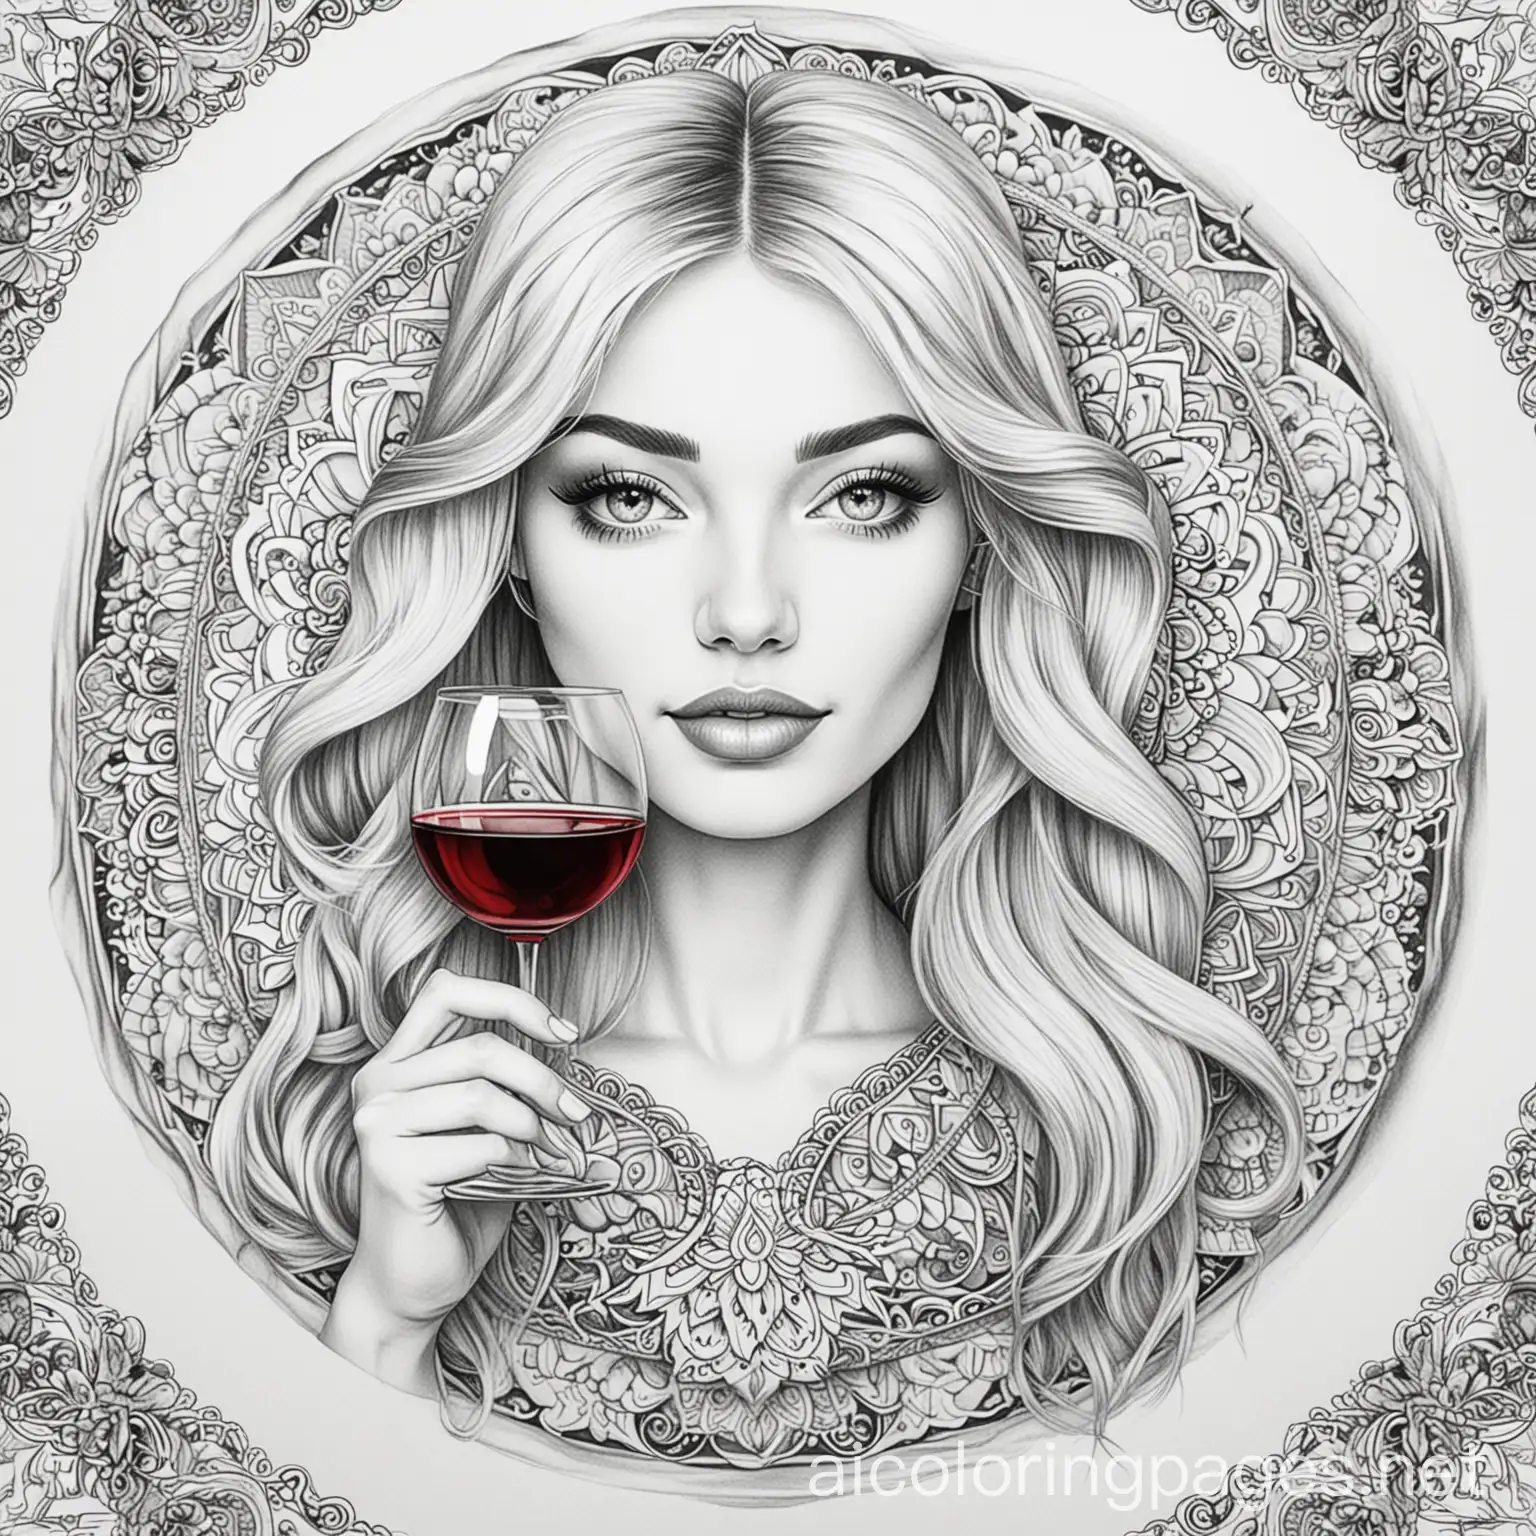 Mandala-Coloring-Page-of-Woman-with-Long-Blonde-Hair-and-Red-Wine-Glass